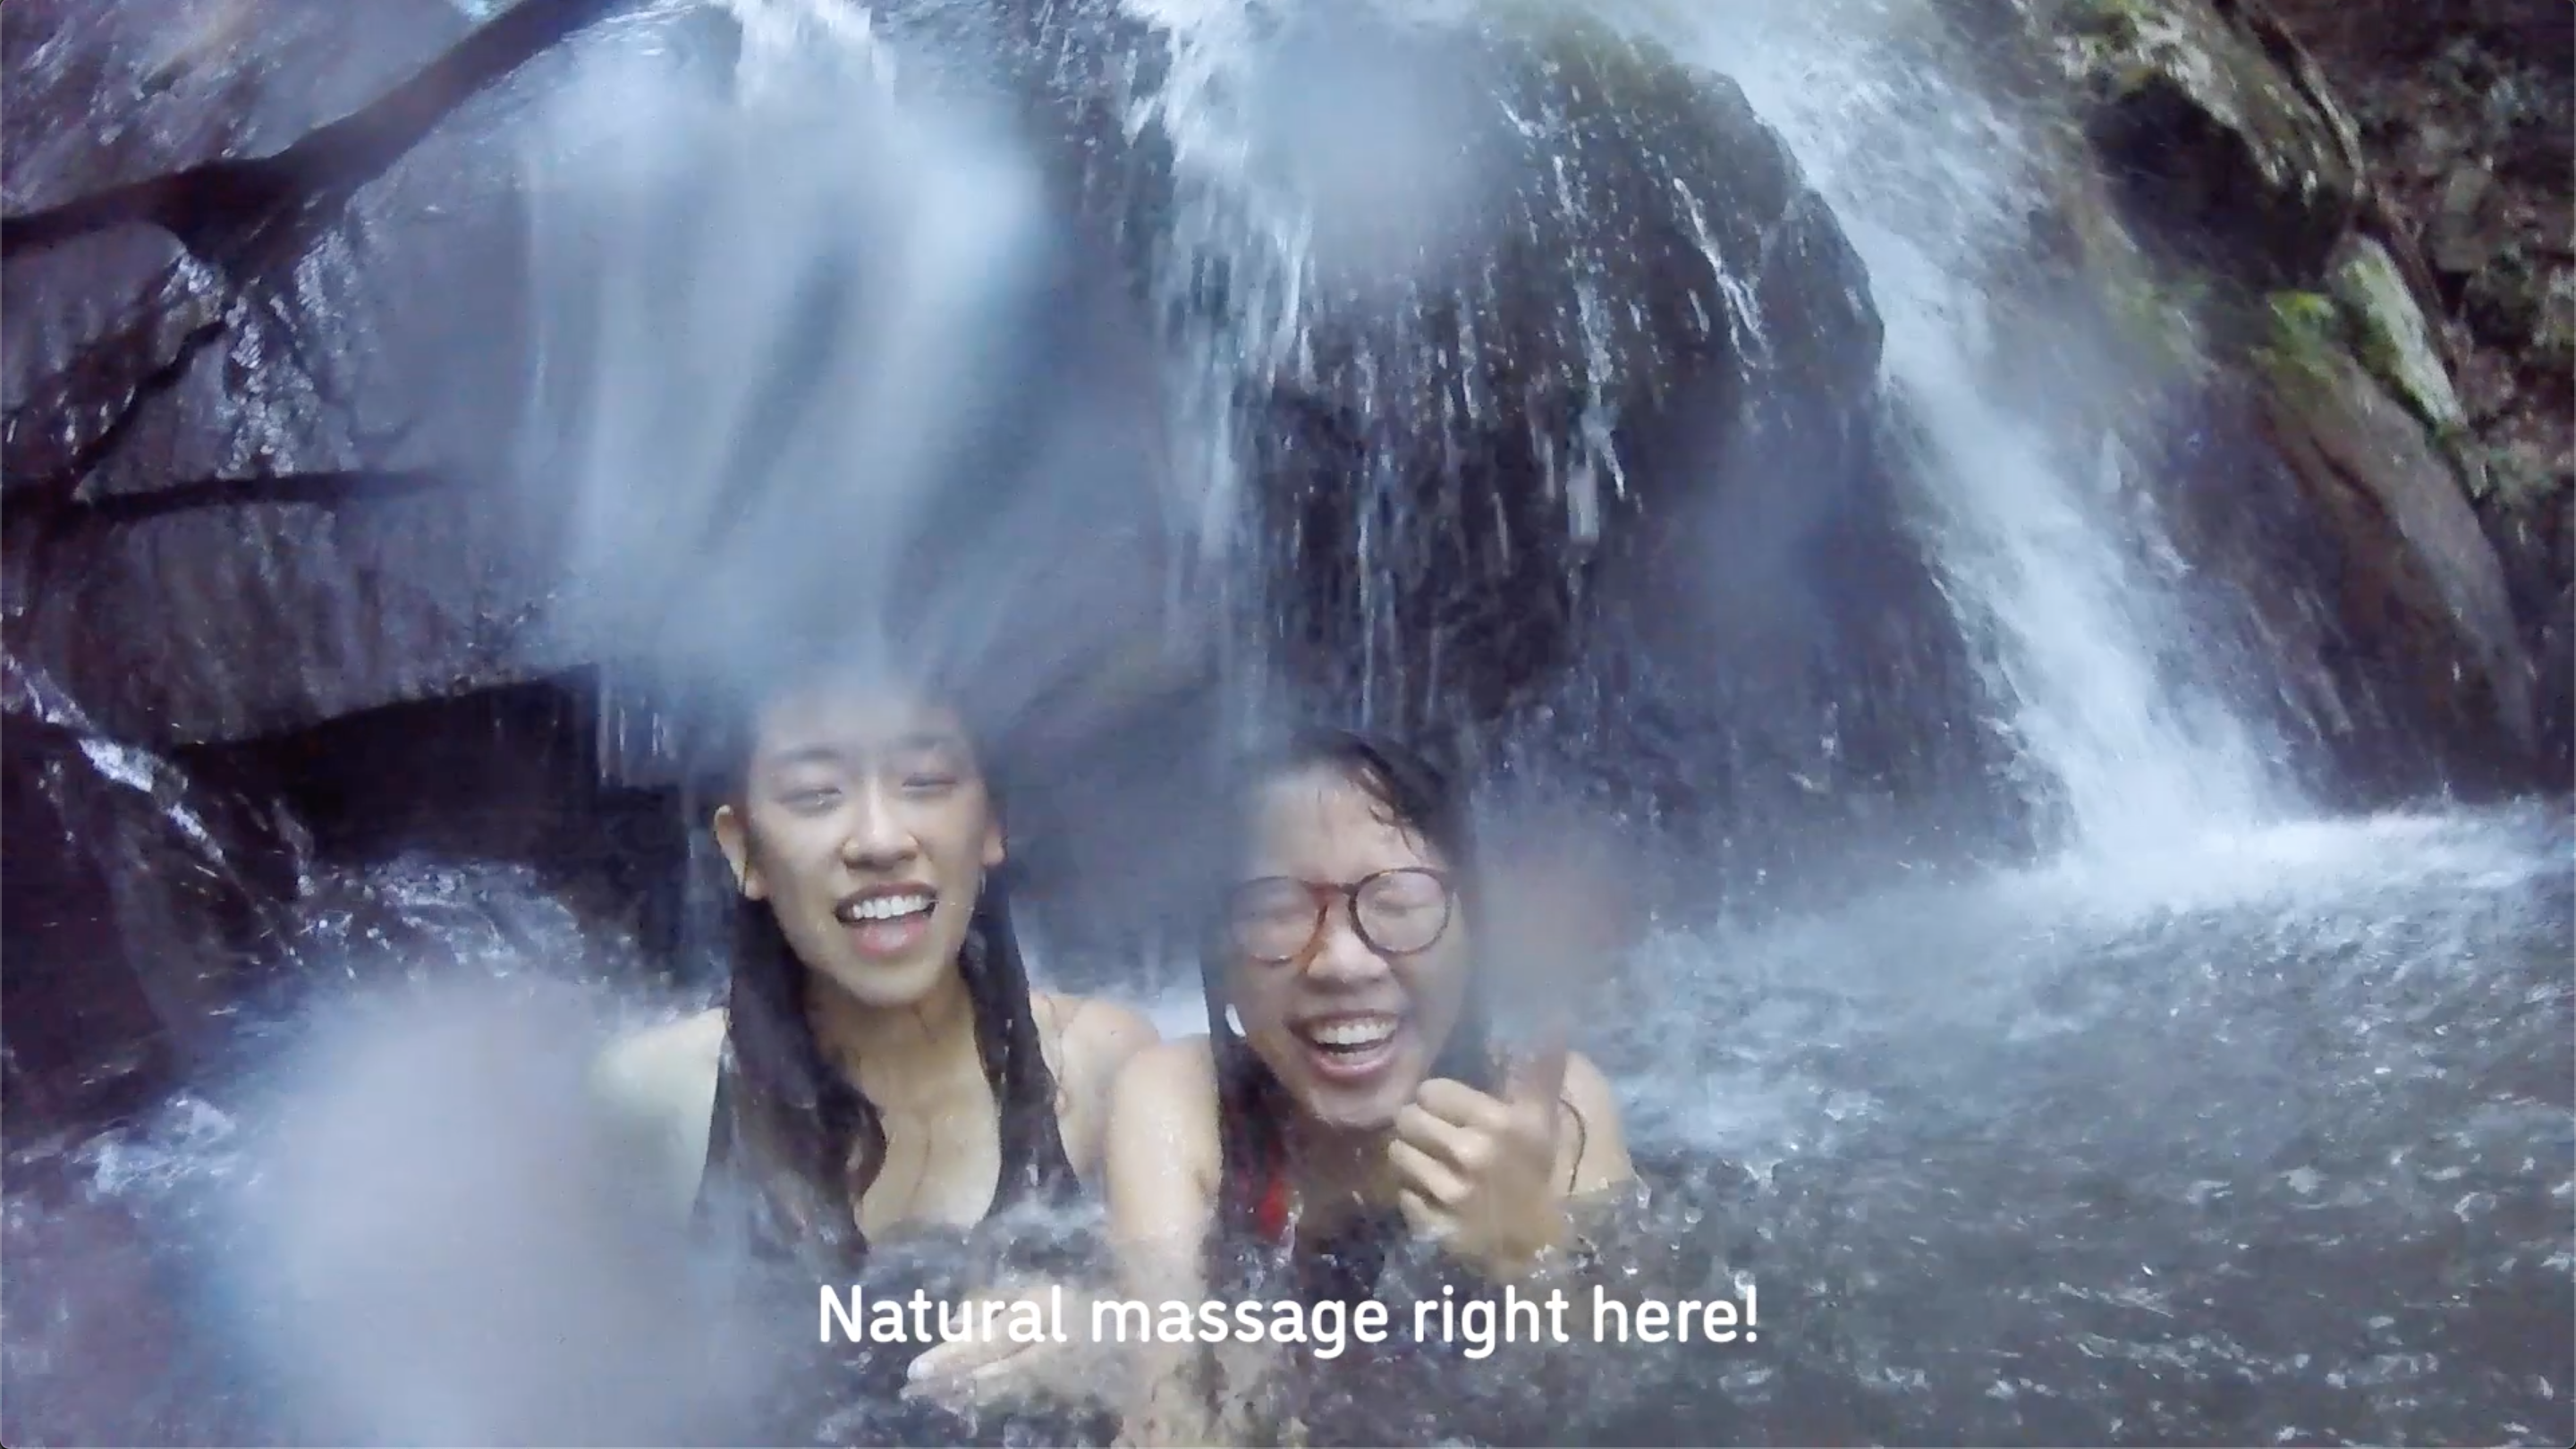 Bathing in the waterfall doubles up as a good back massage